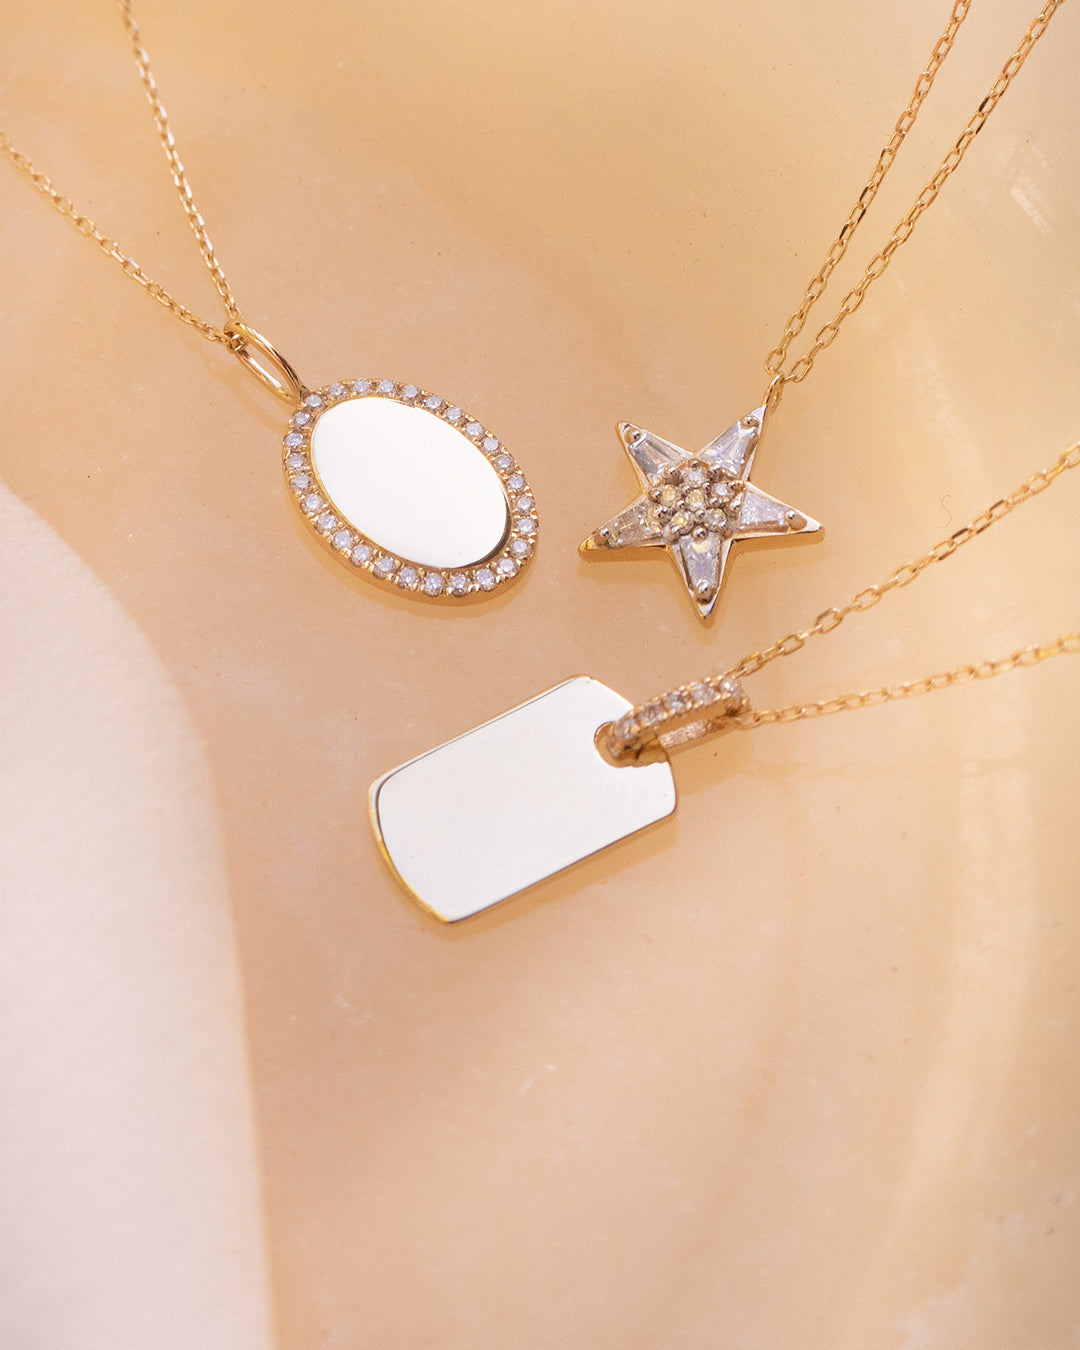 The Pave Star Charm Necklace – Après Jewelry